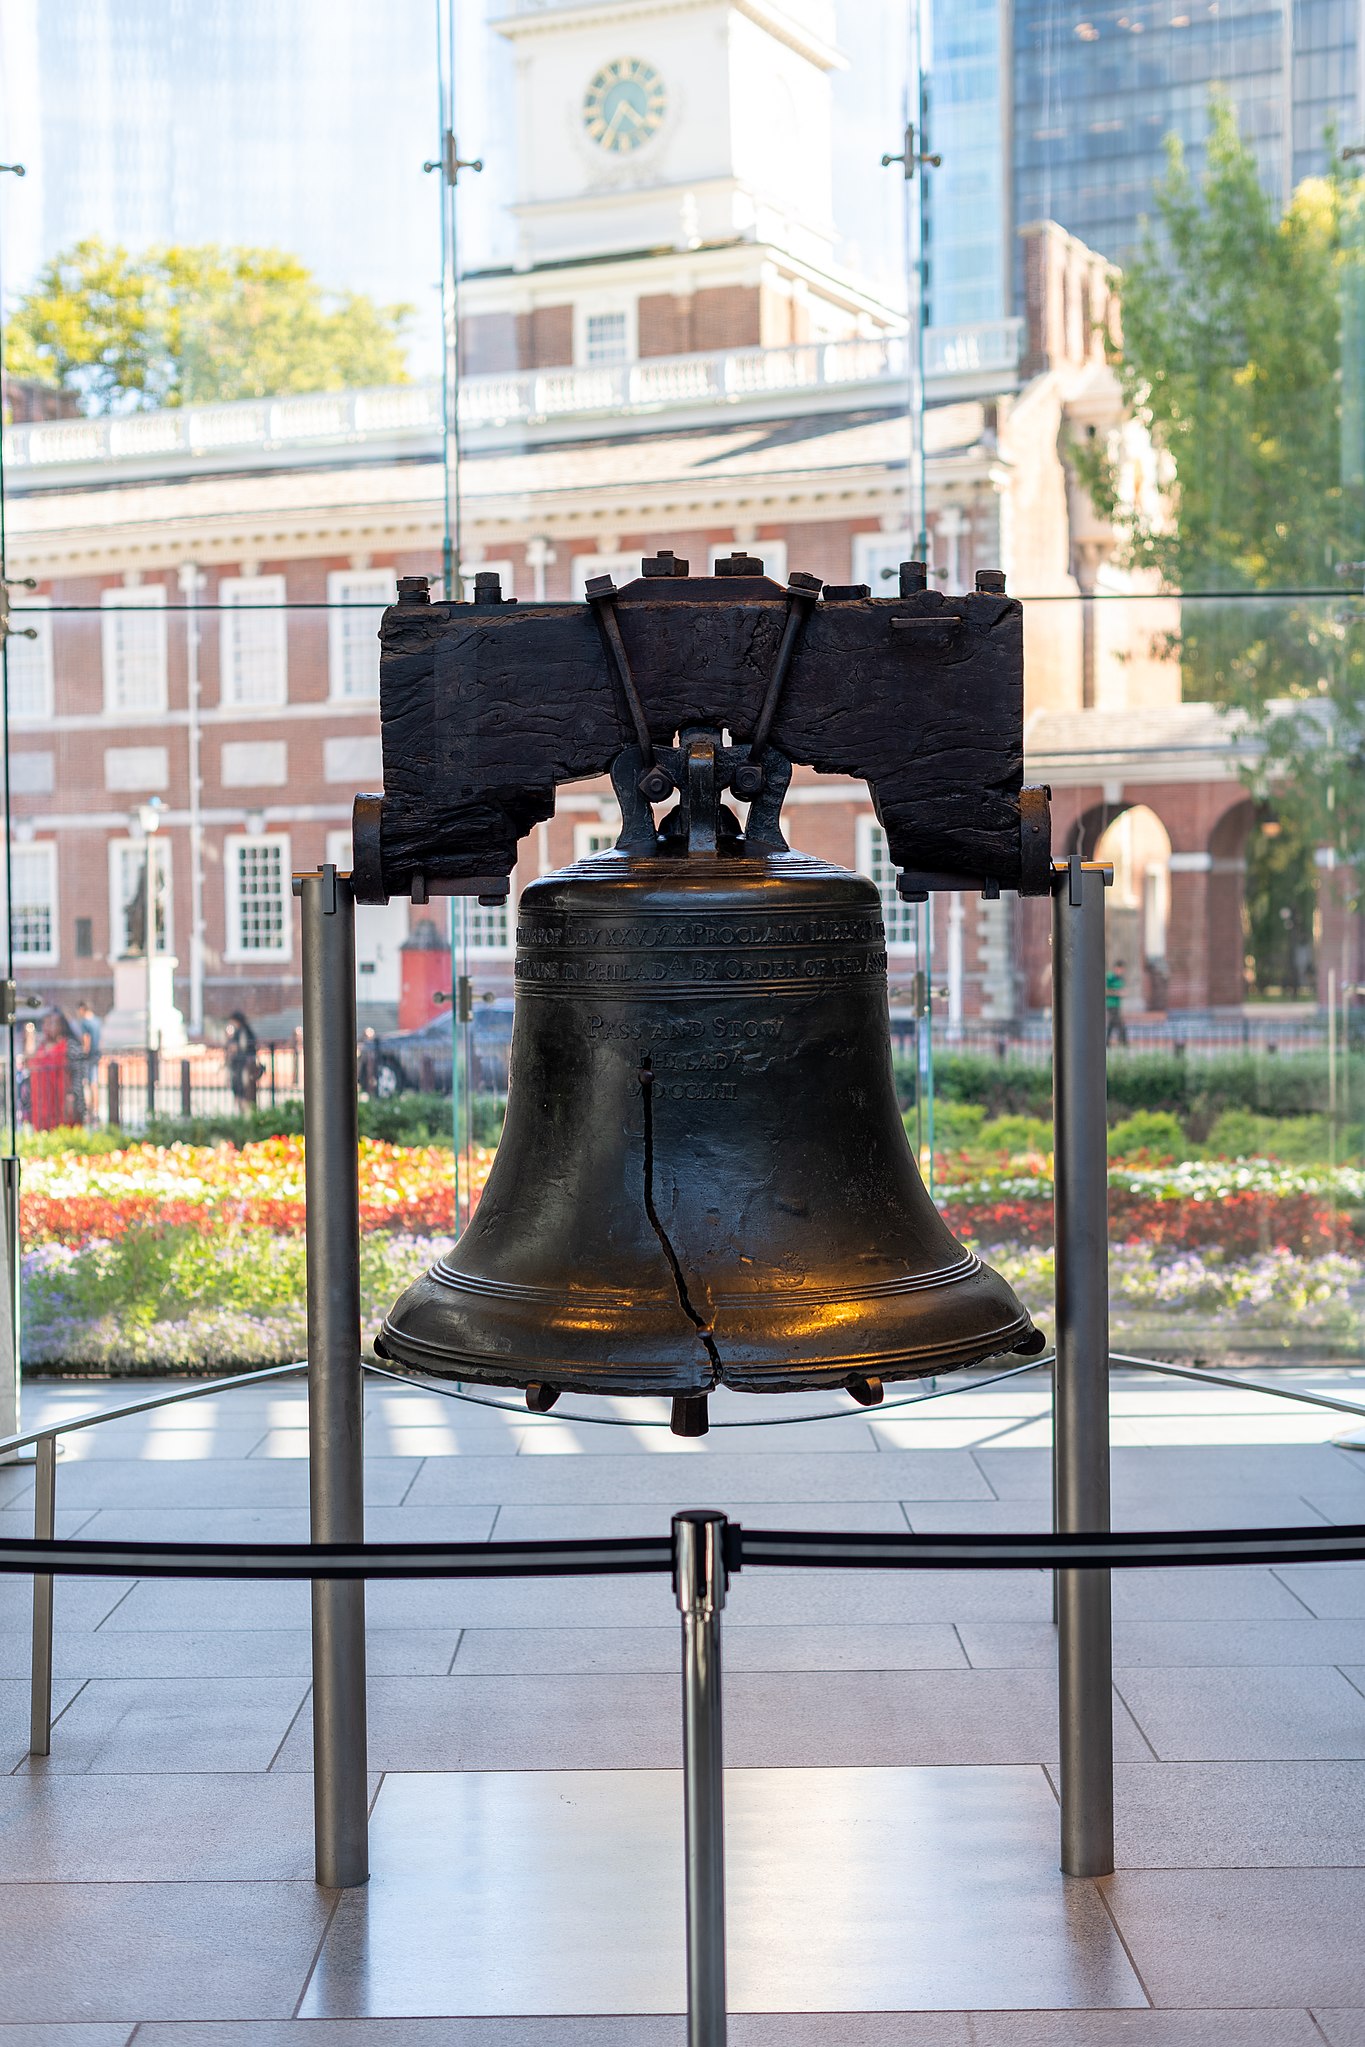 The Grand Experiment Liberty Bell https://commons.wikimedia.org/w/index.php?search=liberty+bell&title=Special:MediaSearch&go=Go&type=image&haslicense=attribution-same-license Happy Independence Day 2022